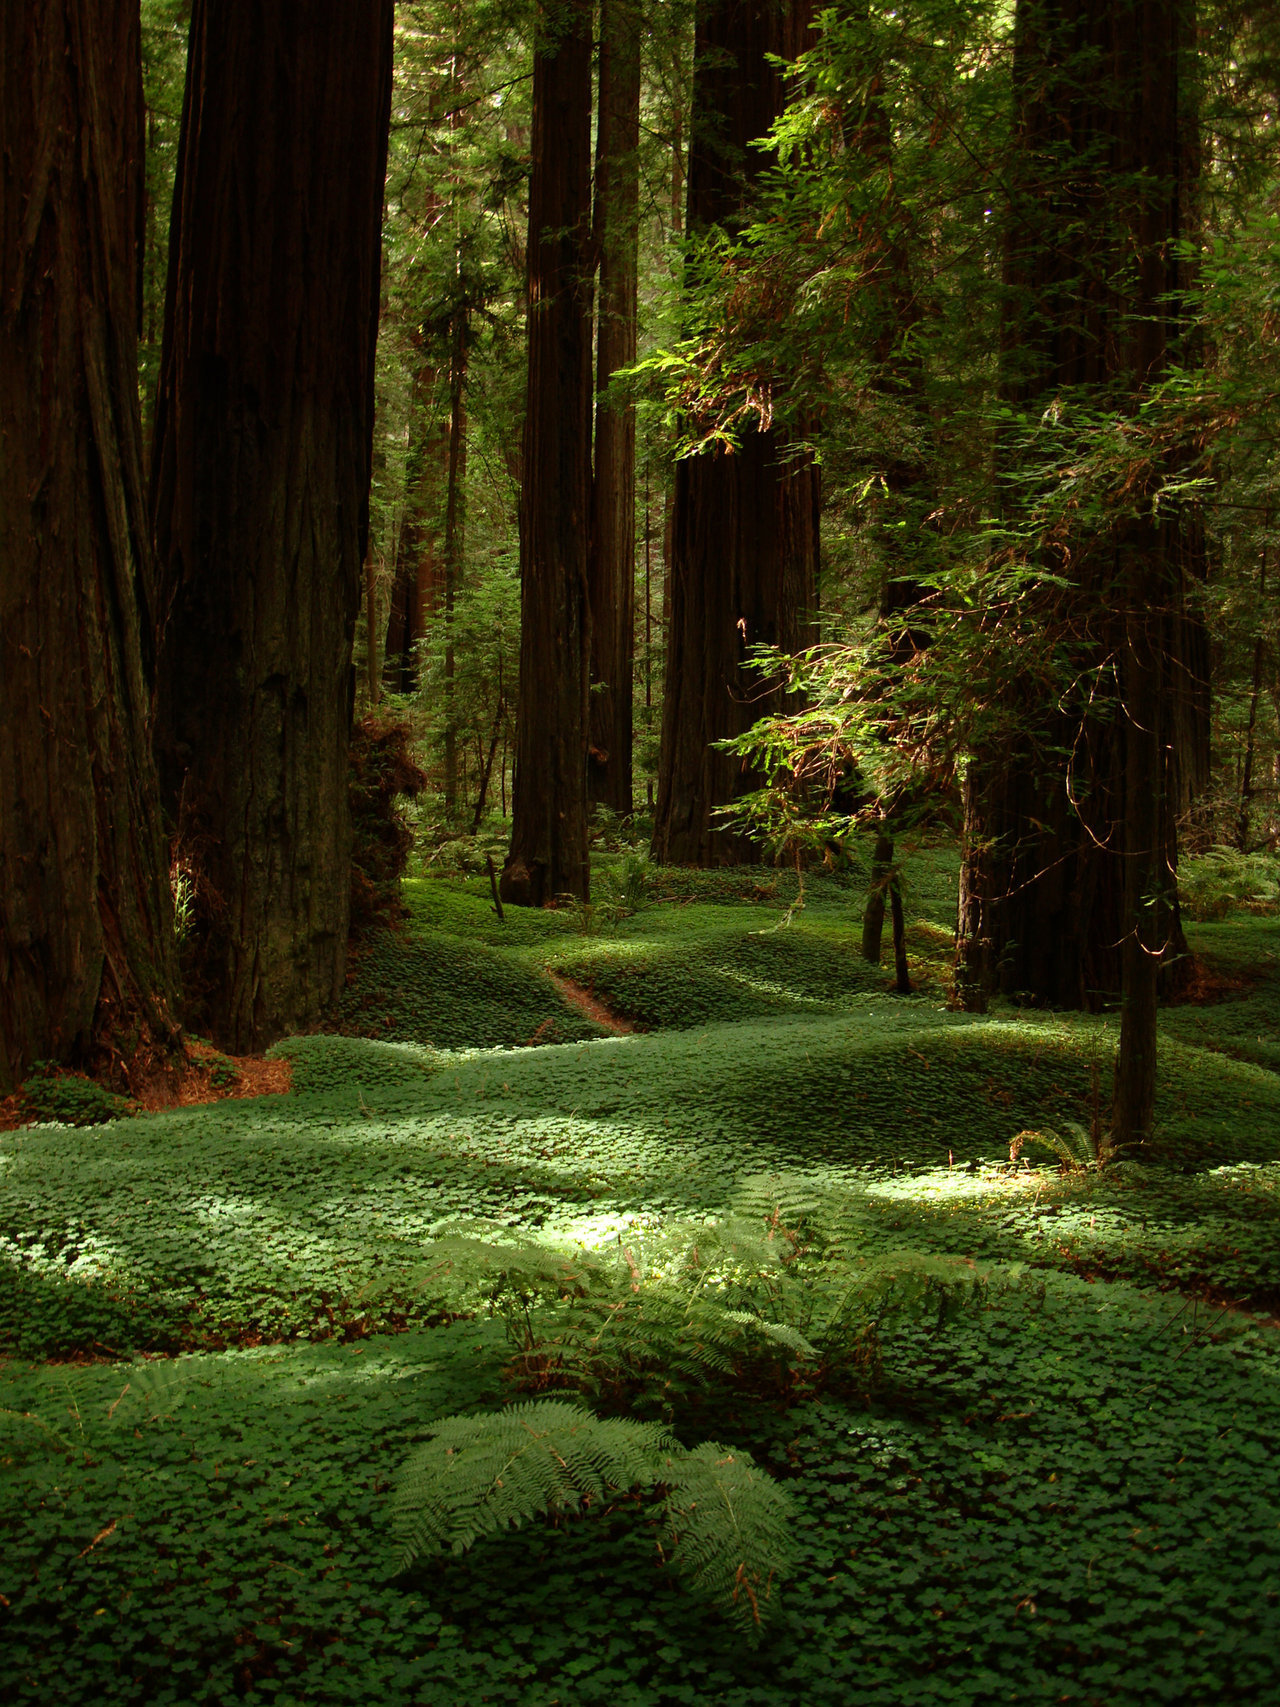 Lord of the Rings Scenery — Fangorn Forest - California